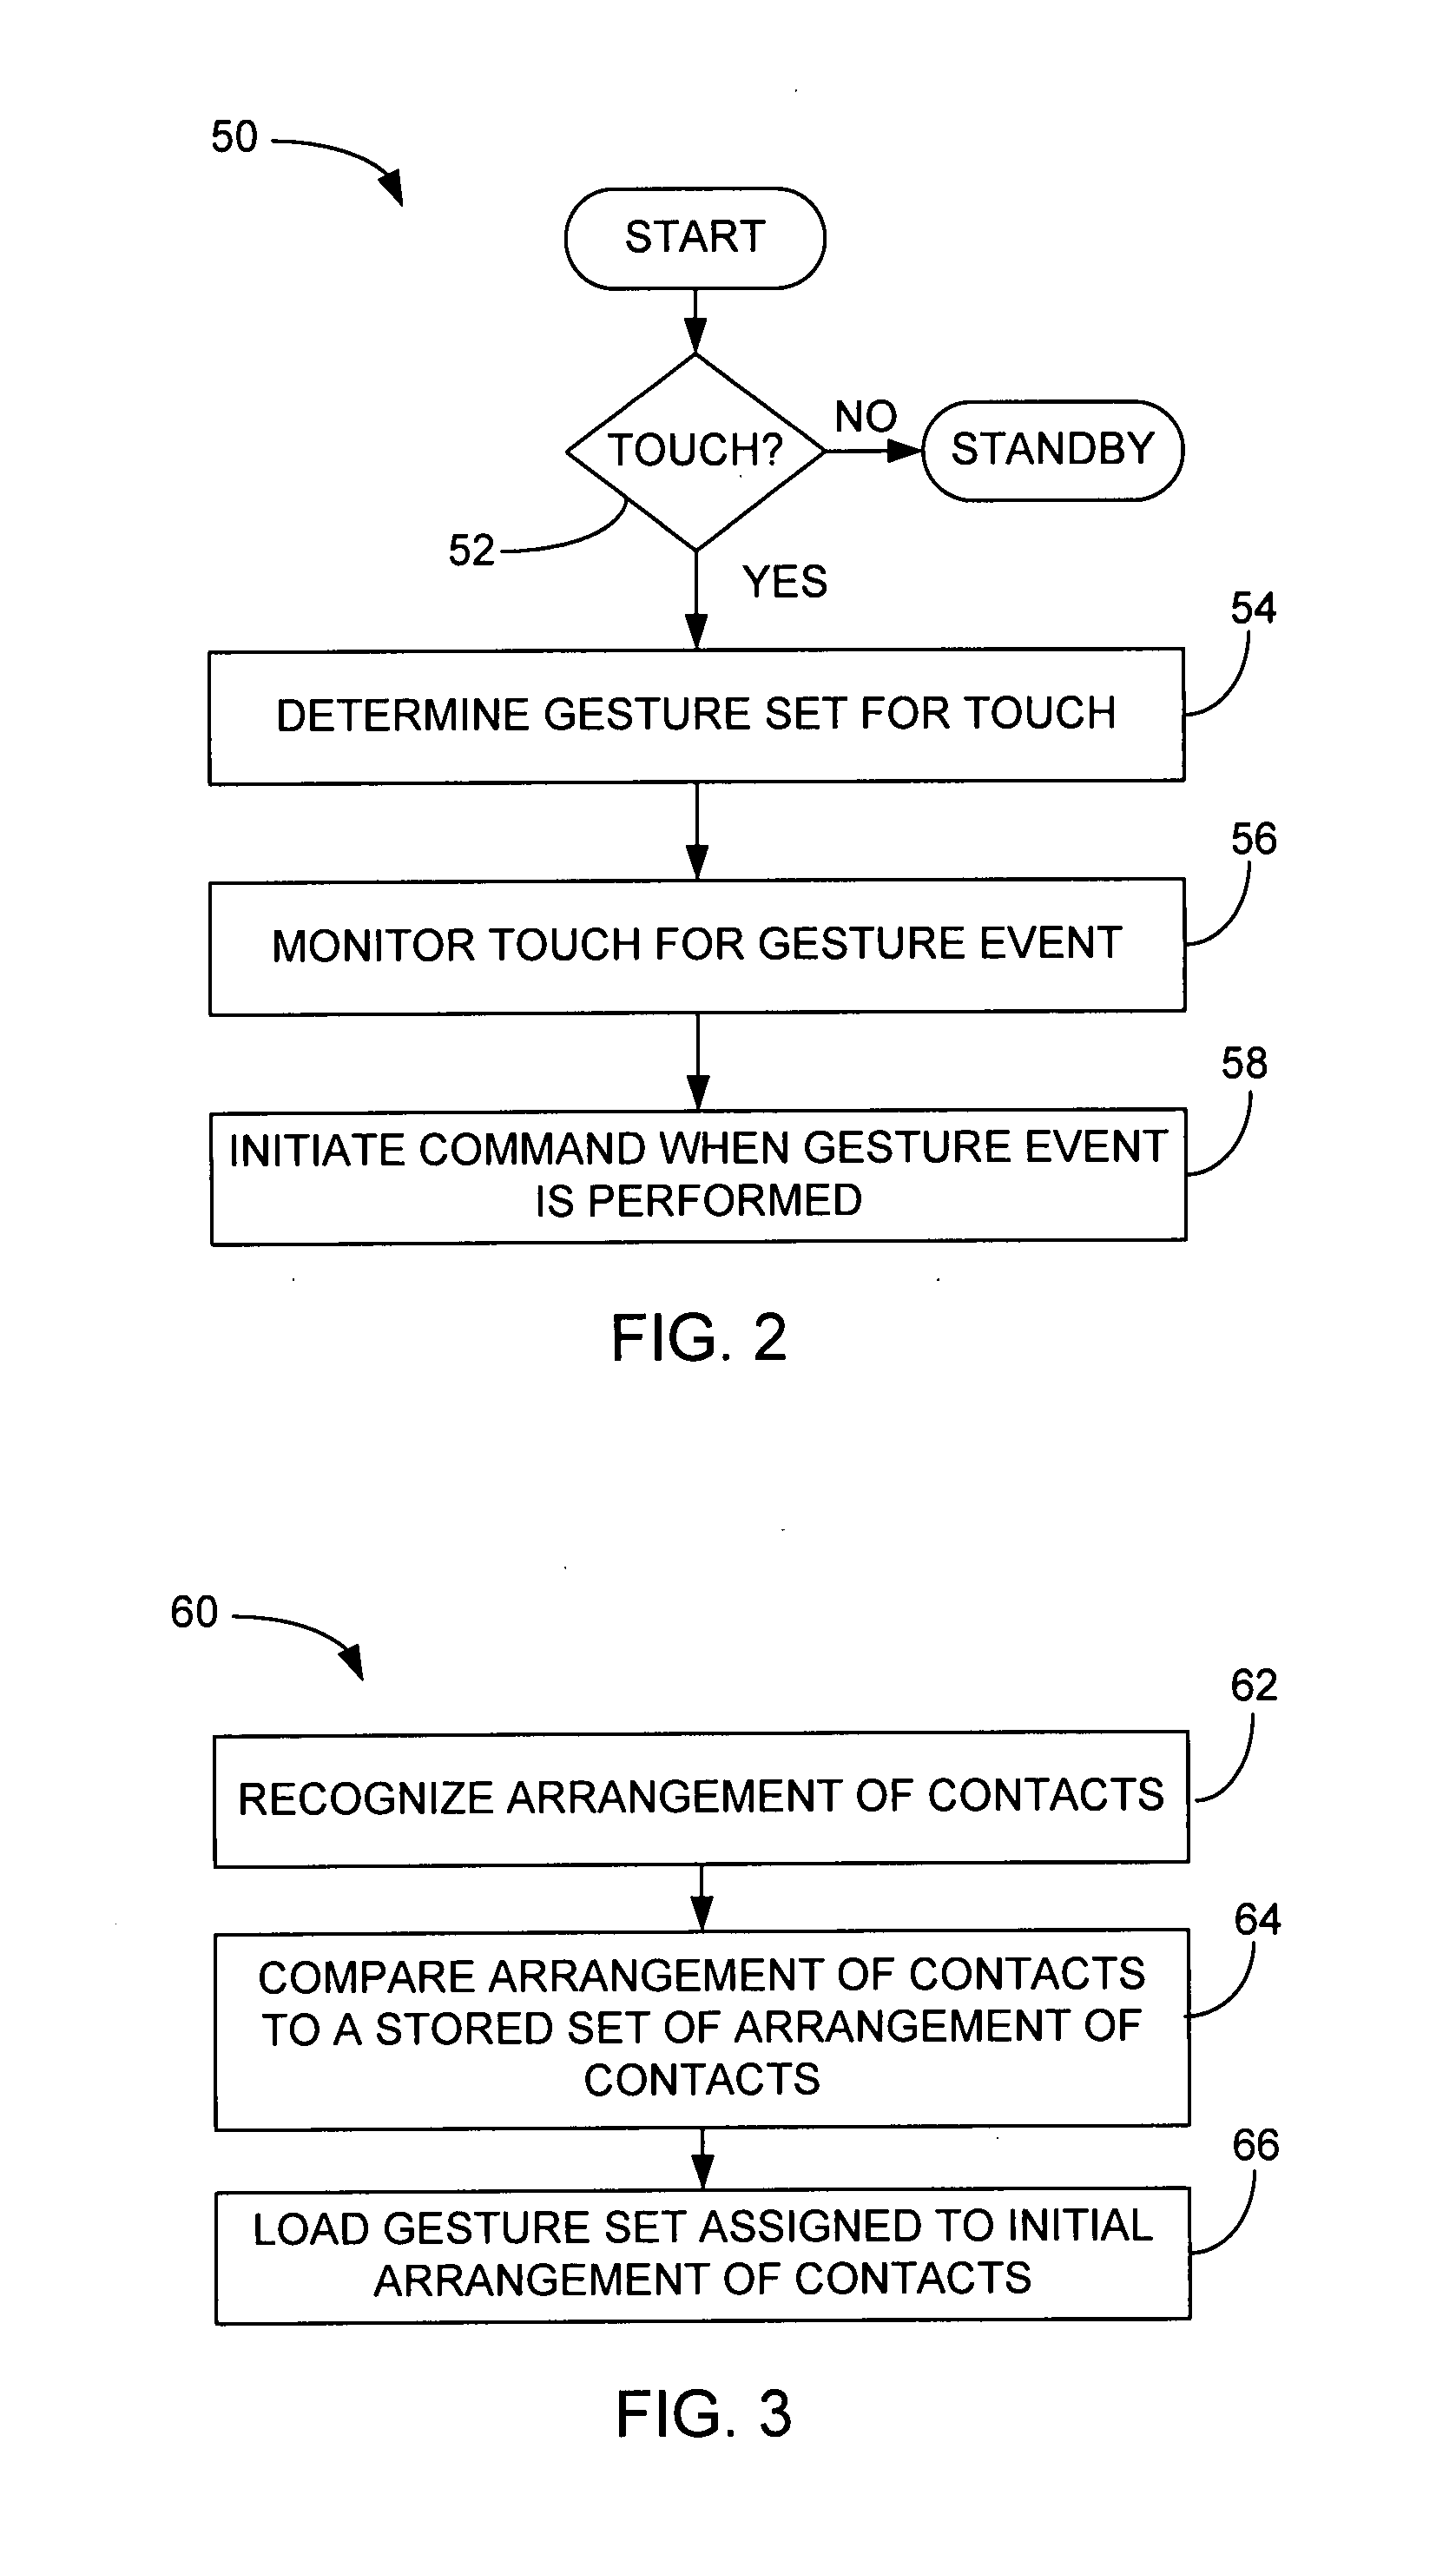 Gesturing with a multipoint sensing device